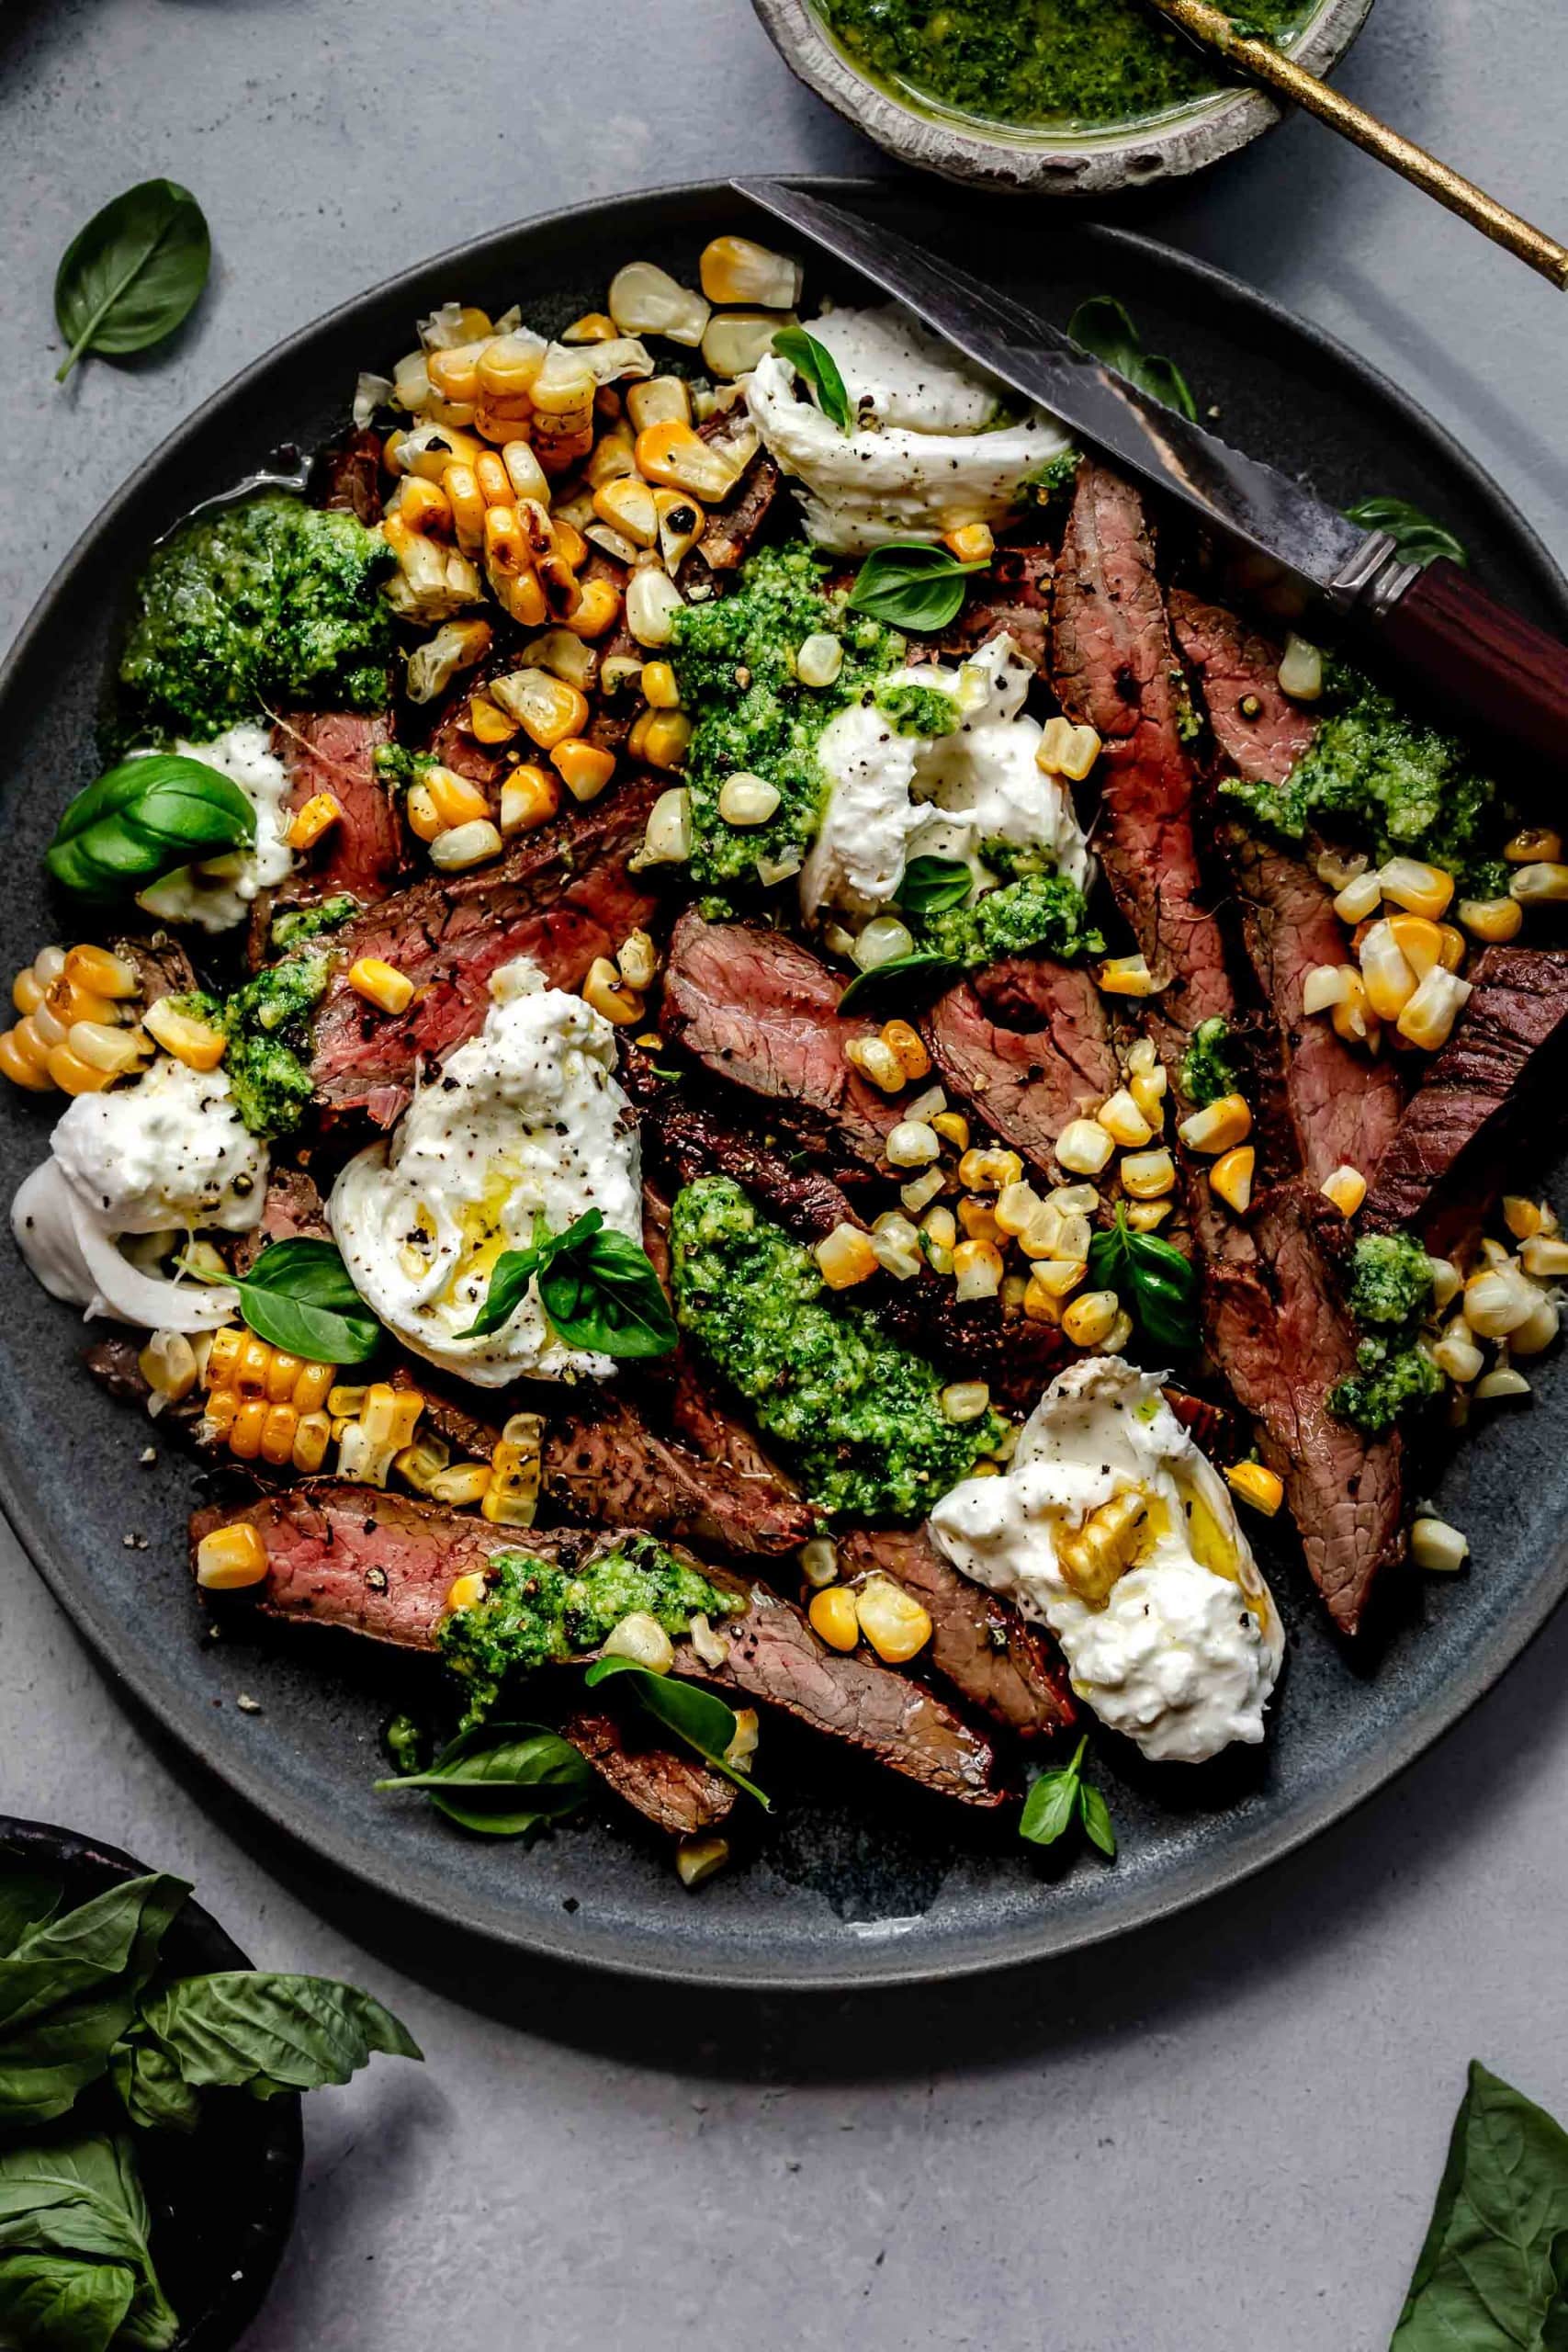 Grilled flank steak arranged on plate topped with corn, pesto and burrata cheese.